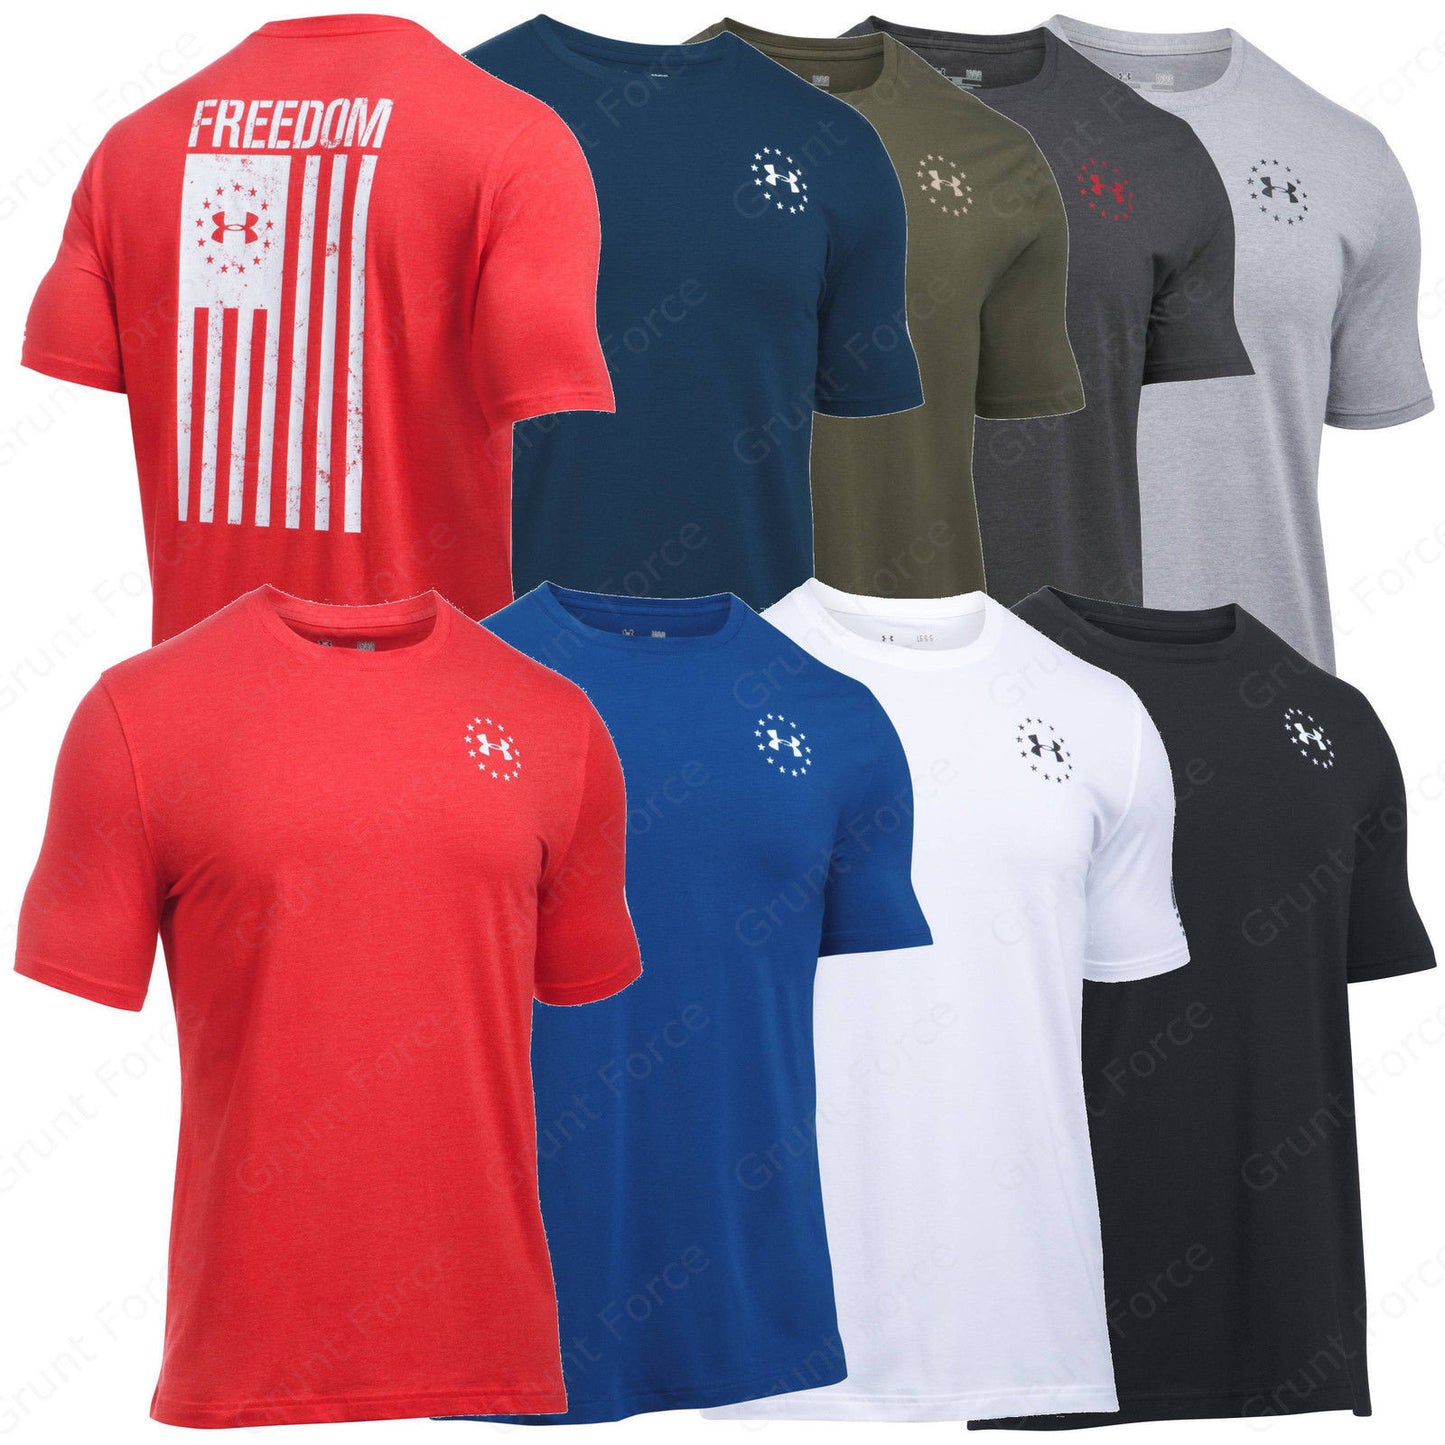 Under Armour Freedom Flag Tee Shirt - UA Men's Tactical Charged Cotton T-Shirt